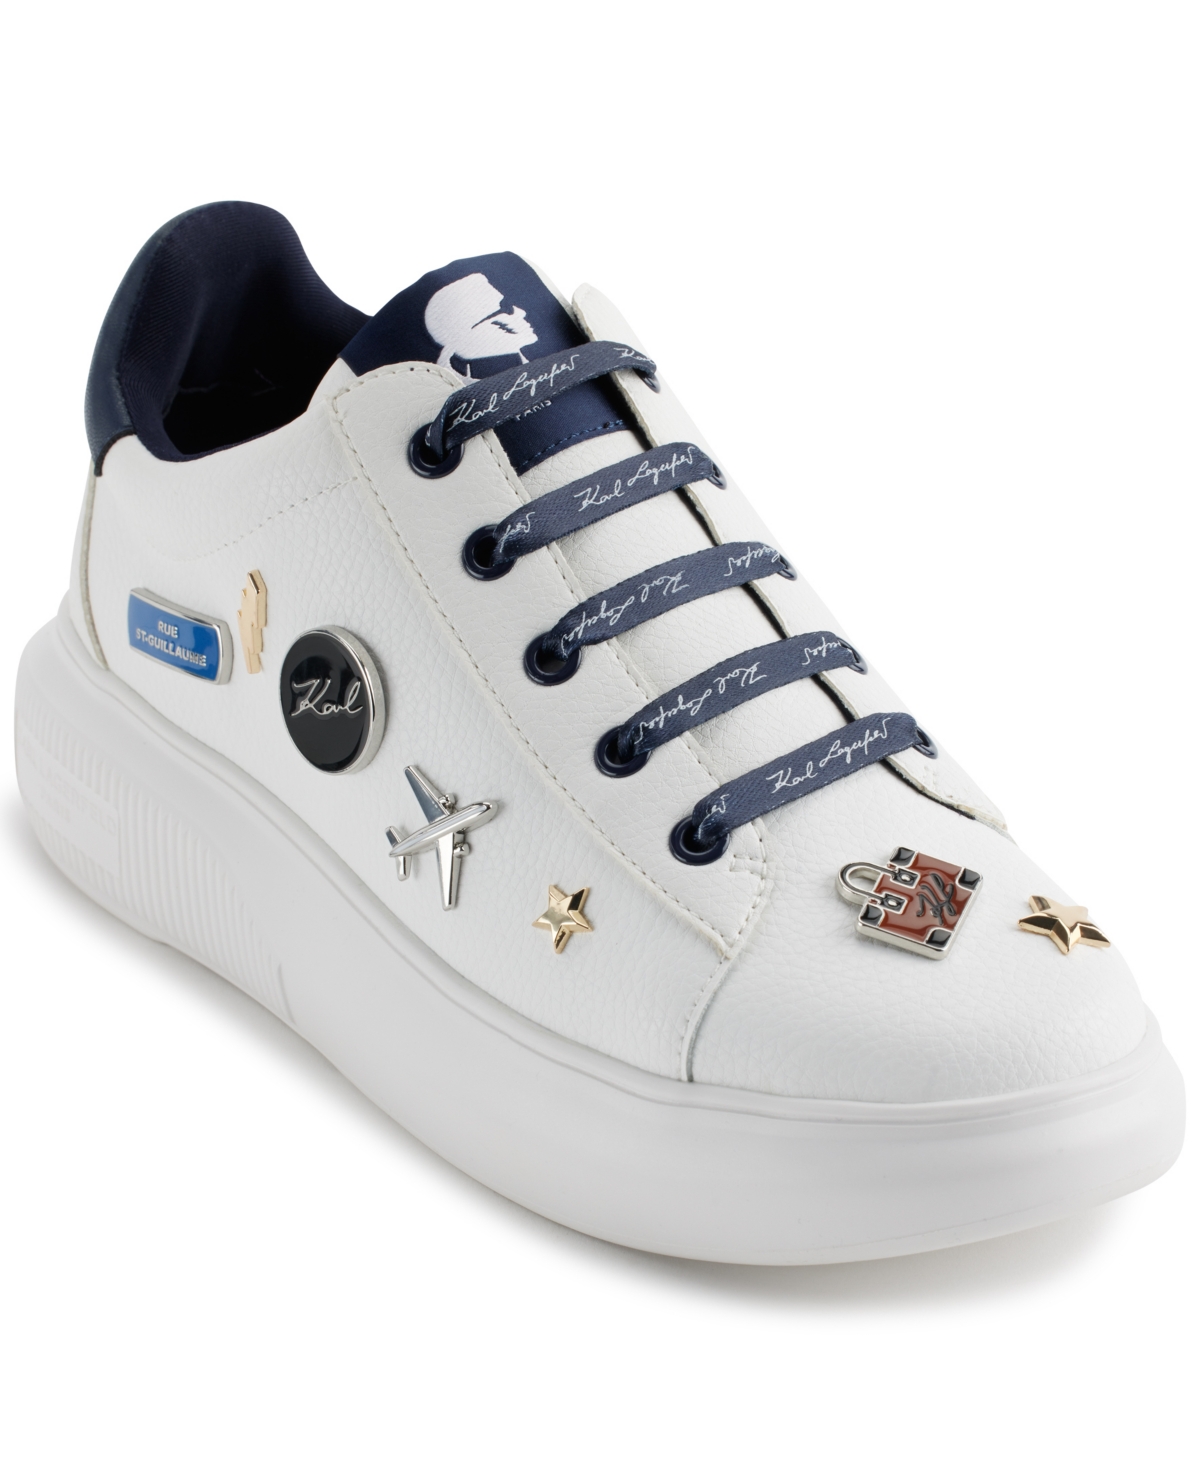 Justina Lace Up Platform Sneakers - Bright White / Navy